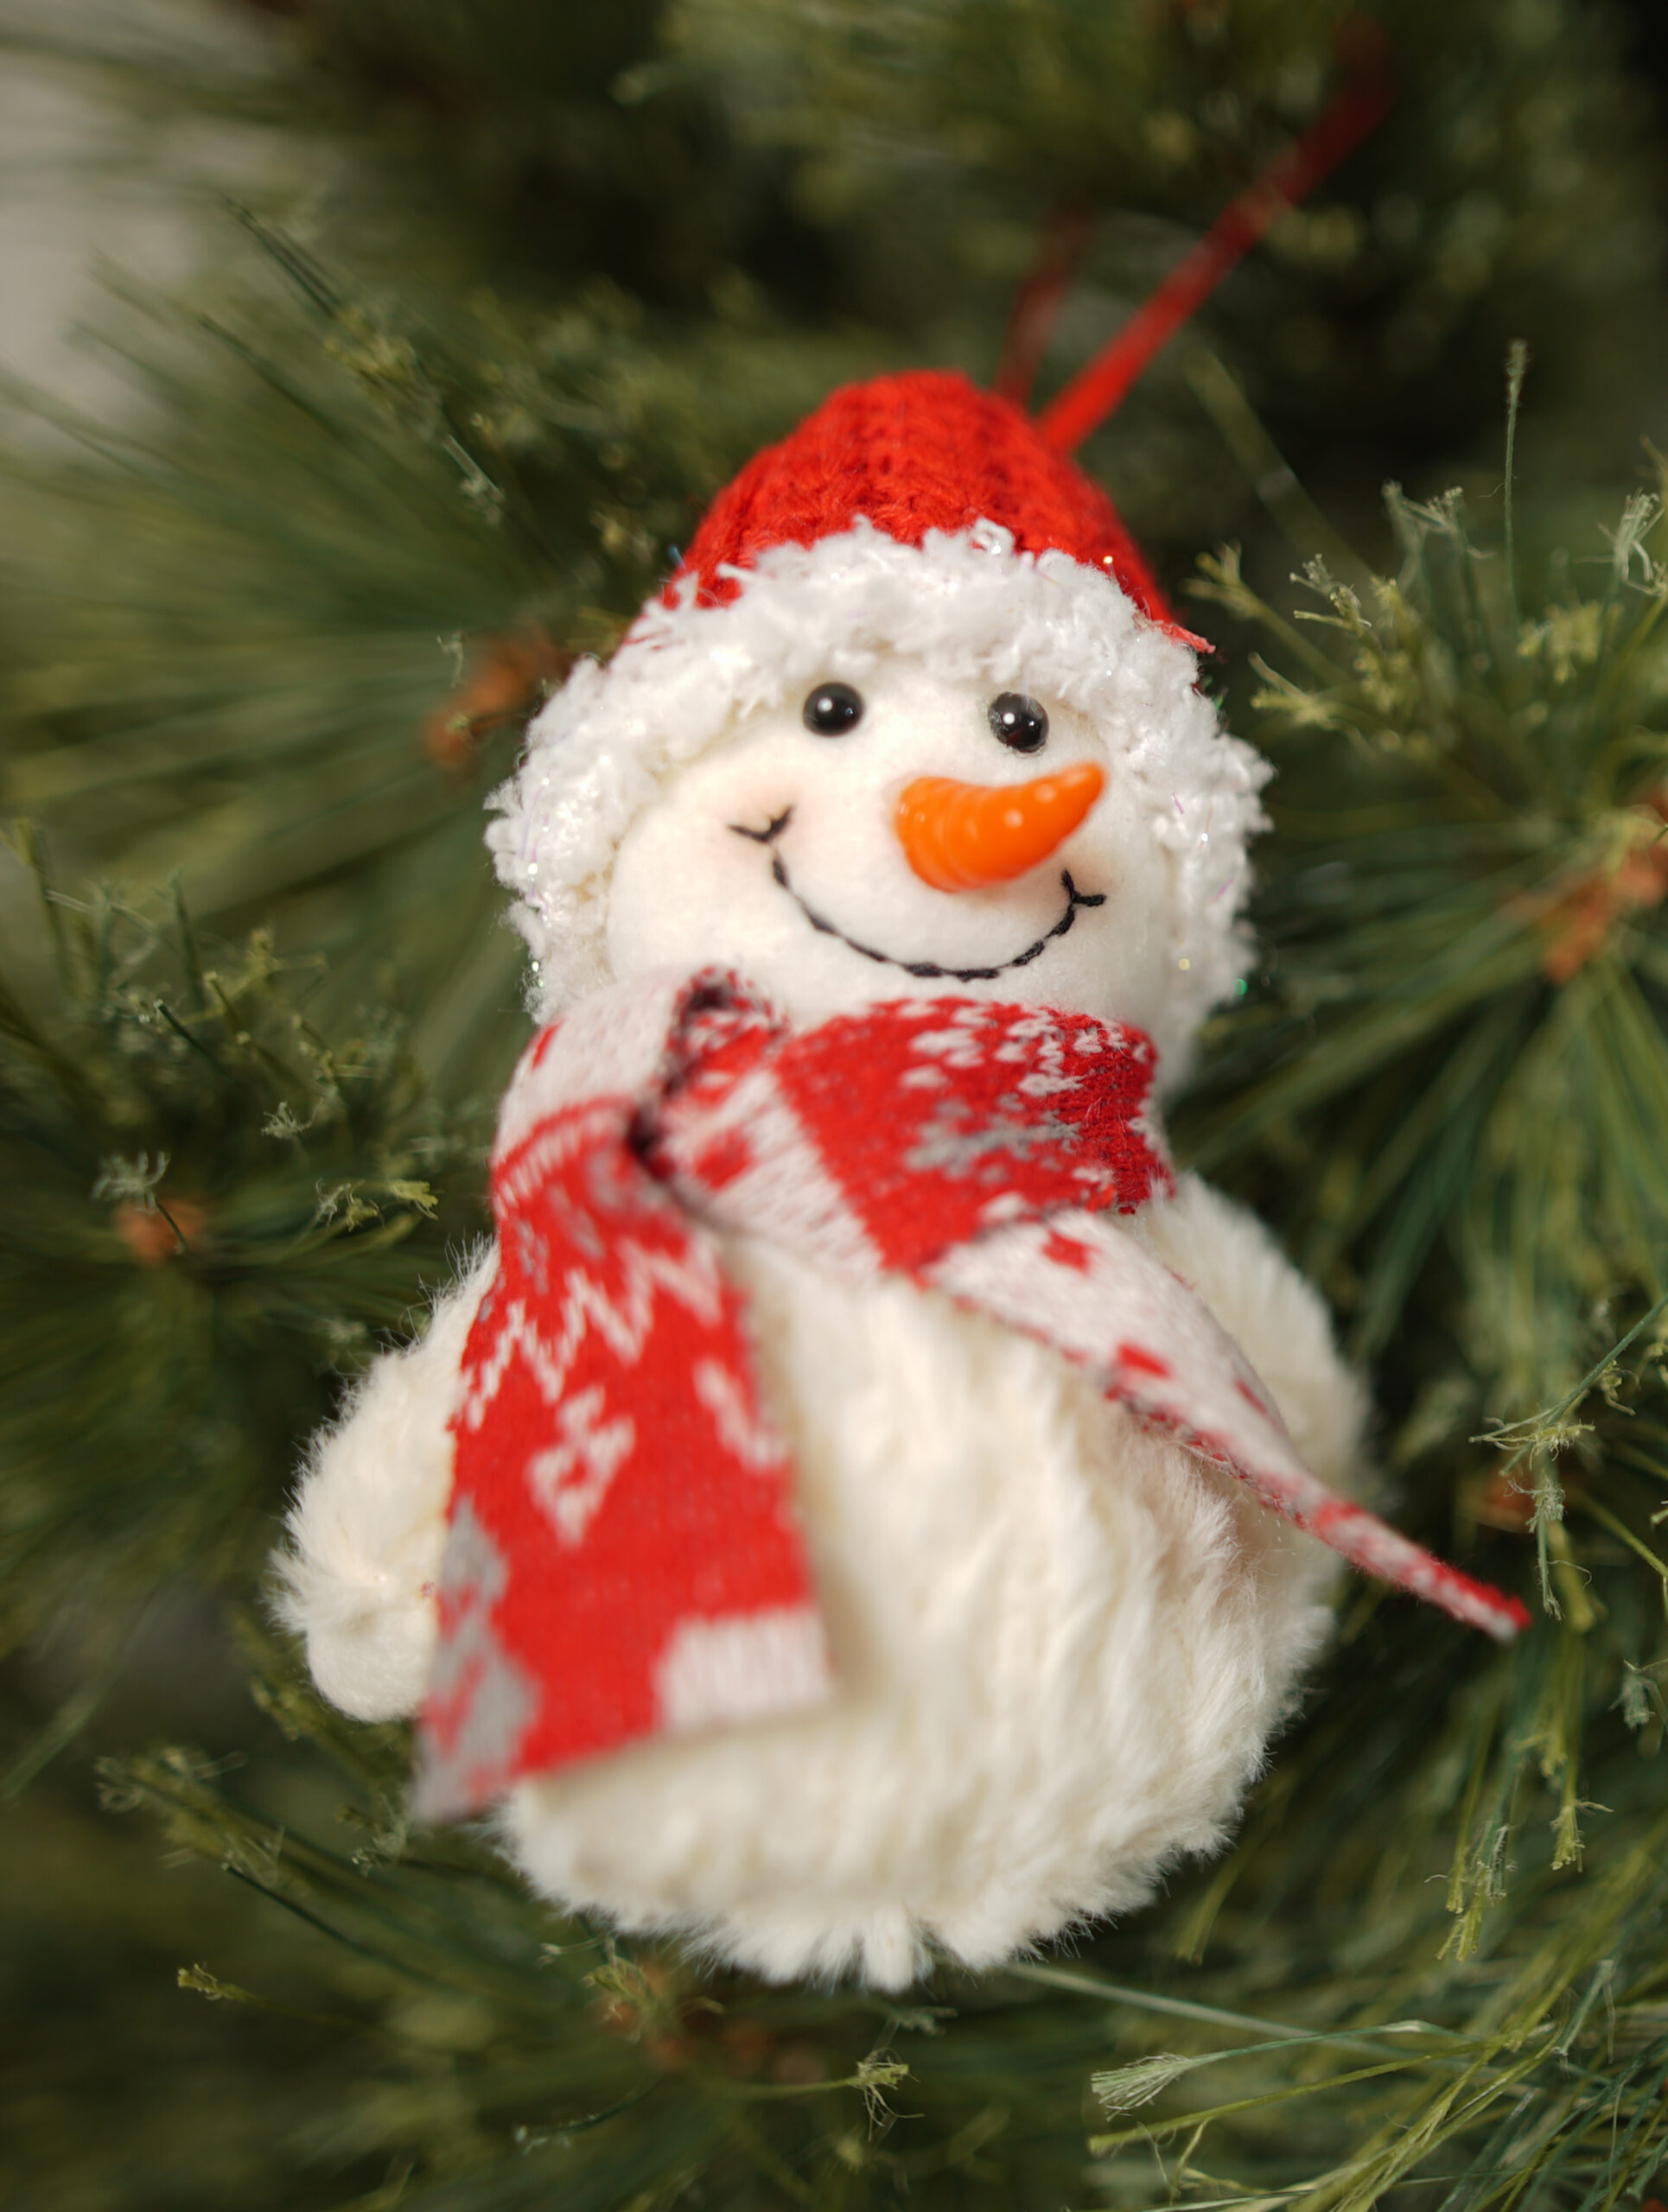 Hanging Snowman with Knitted Hat (Pollyanna)